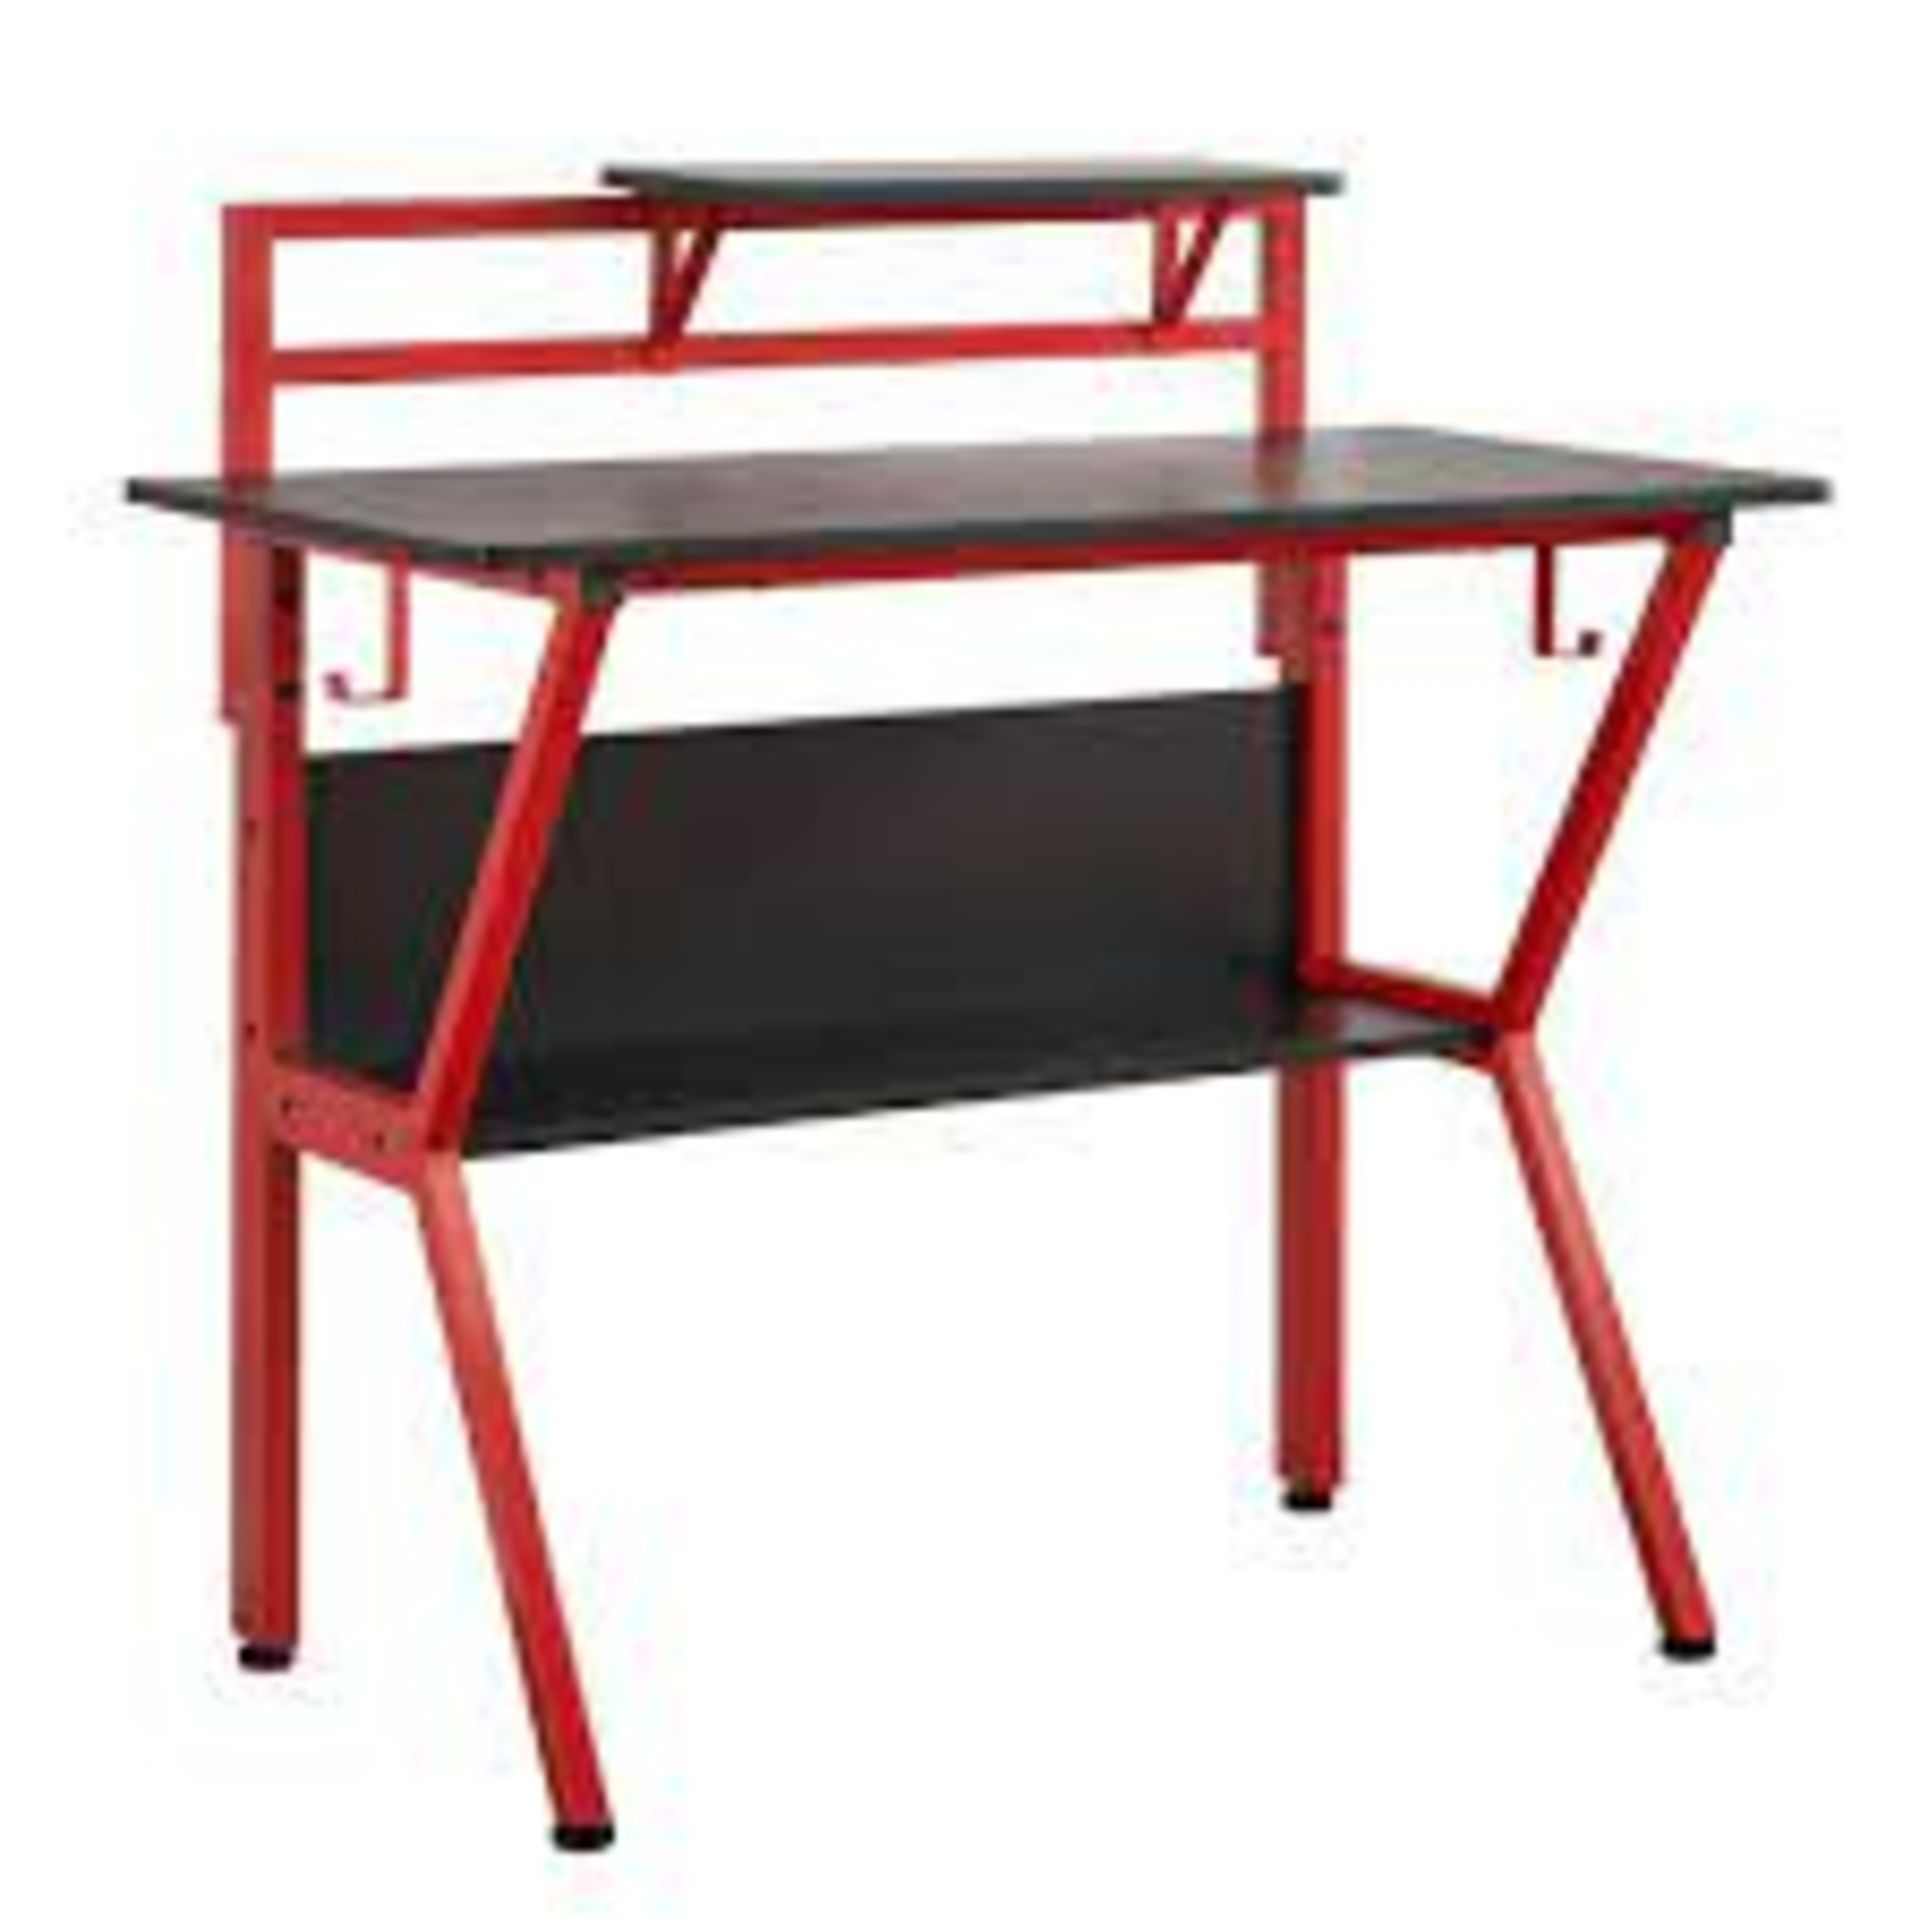 Virtuoso Rogue Black and Red Gaming Desk. - SR3. A compact yet stylish way to maximise space, the